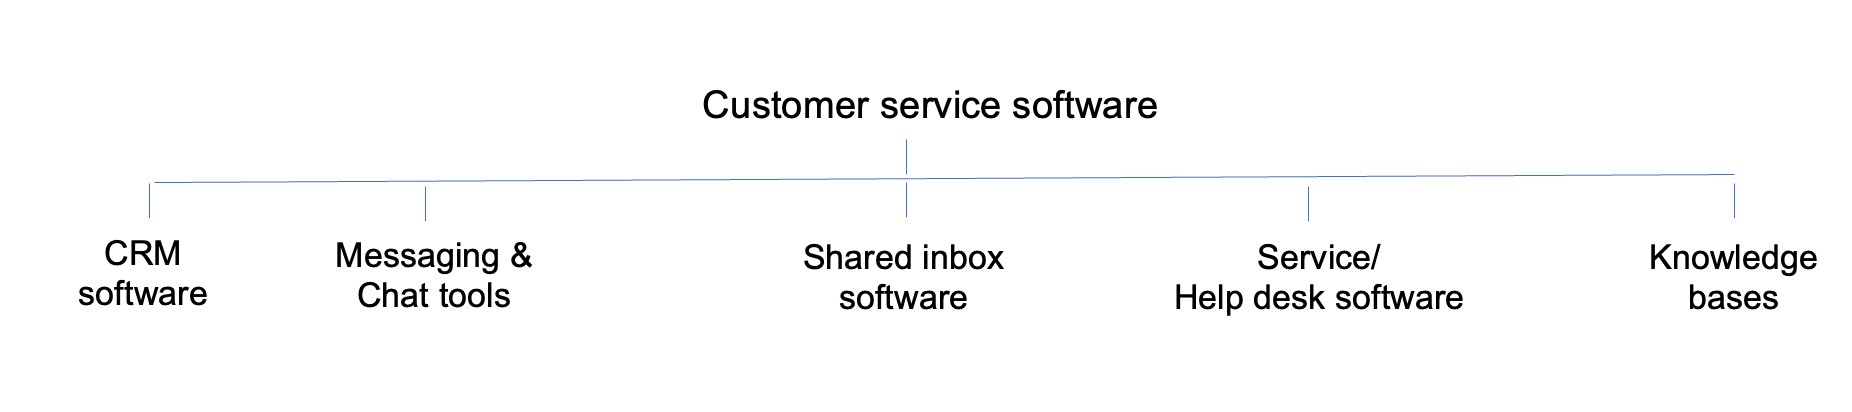 Types of Customer service software